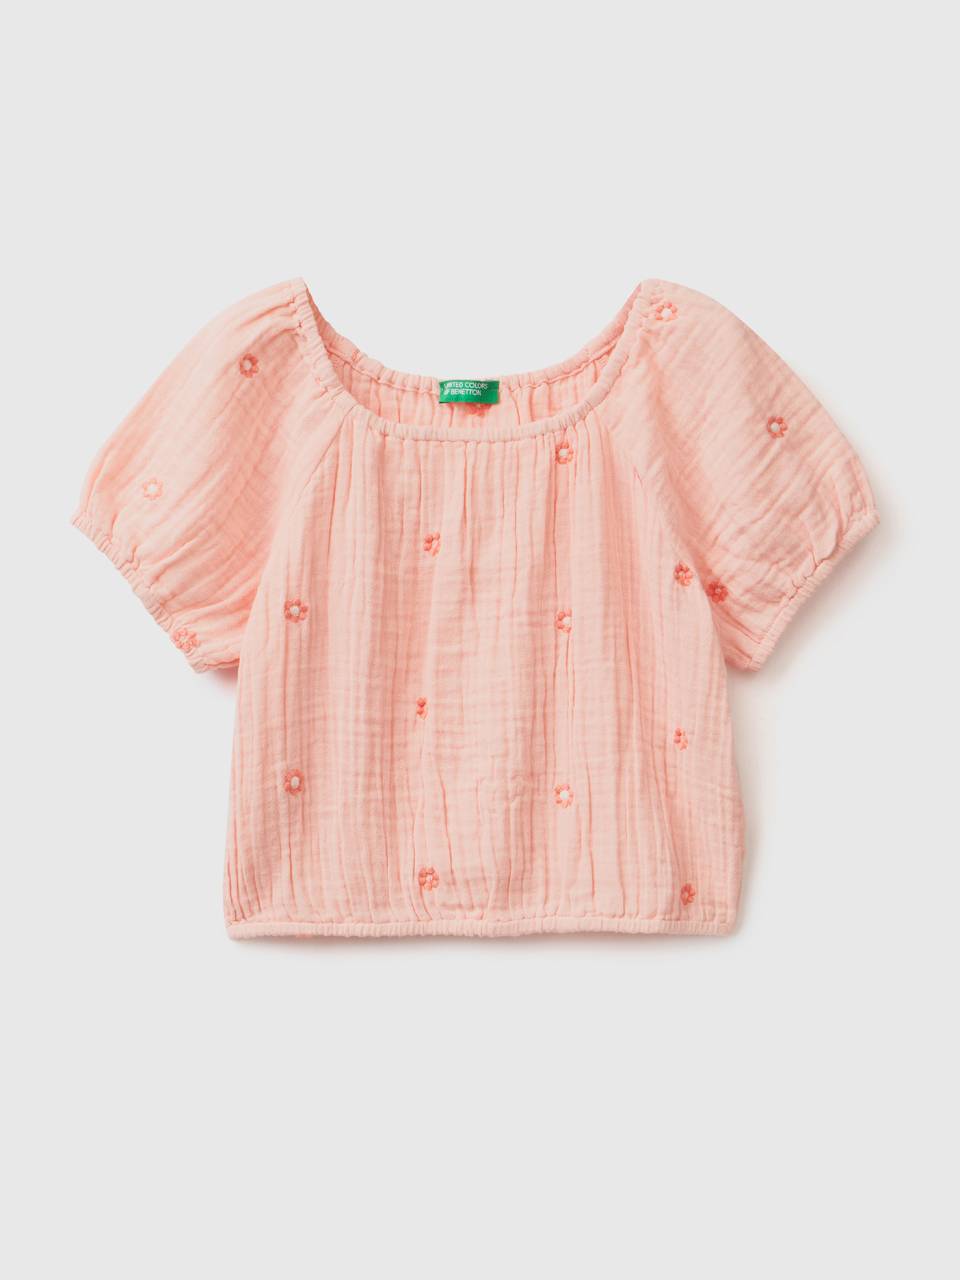 Benetton top with embroidered flowers. 1